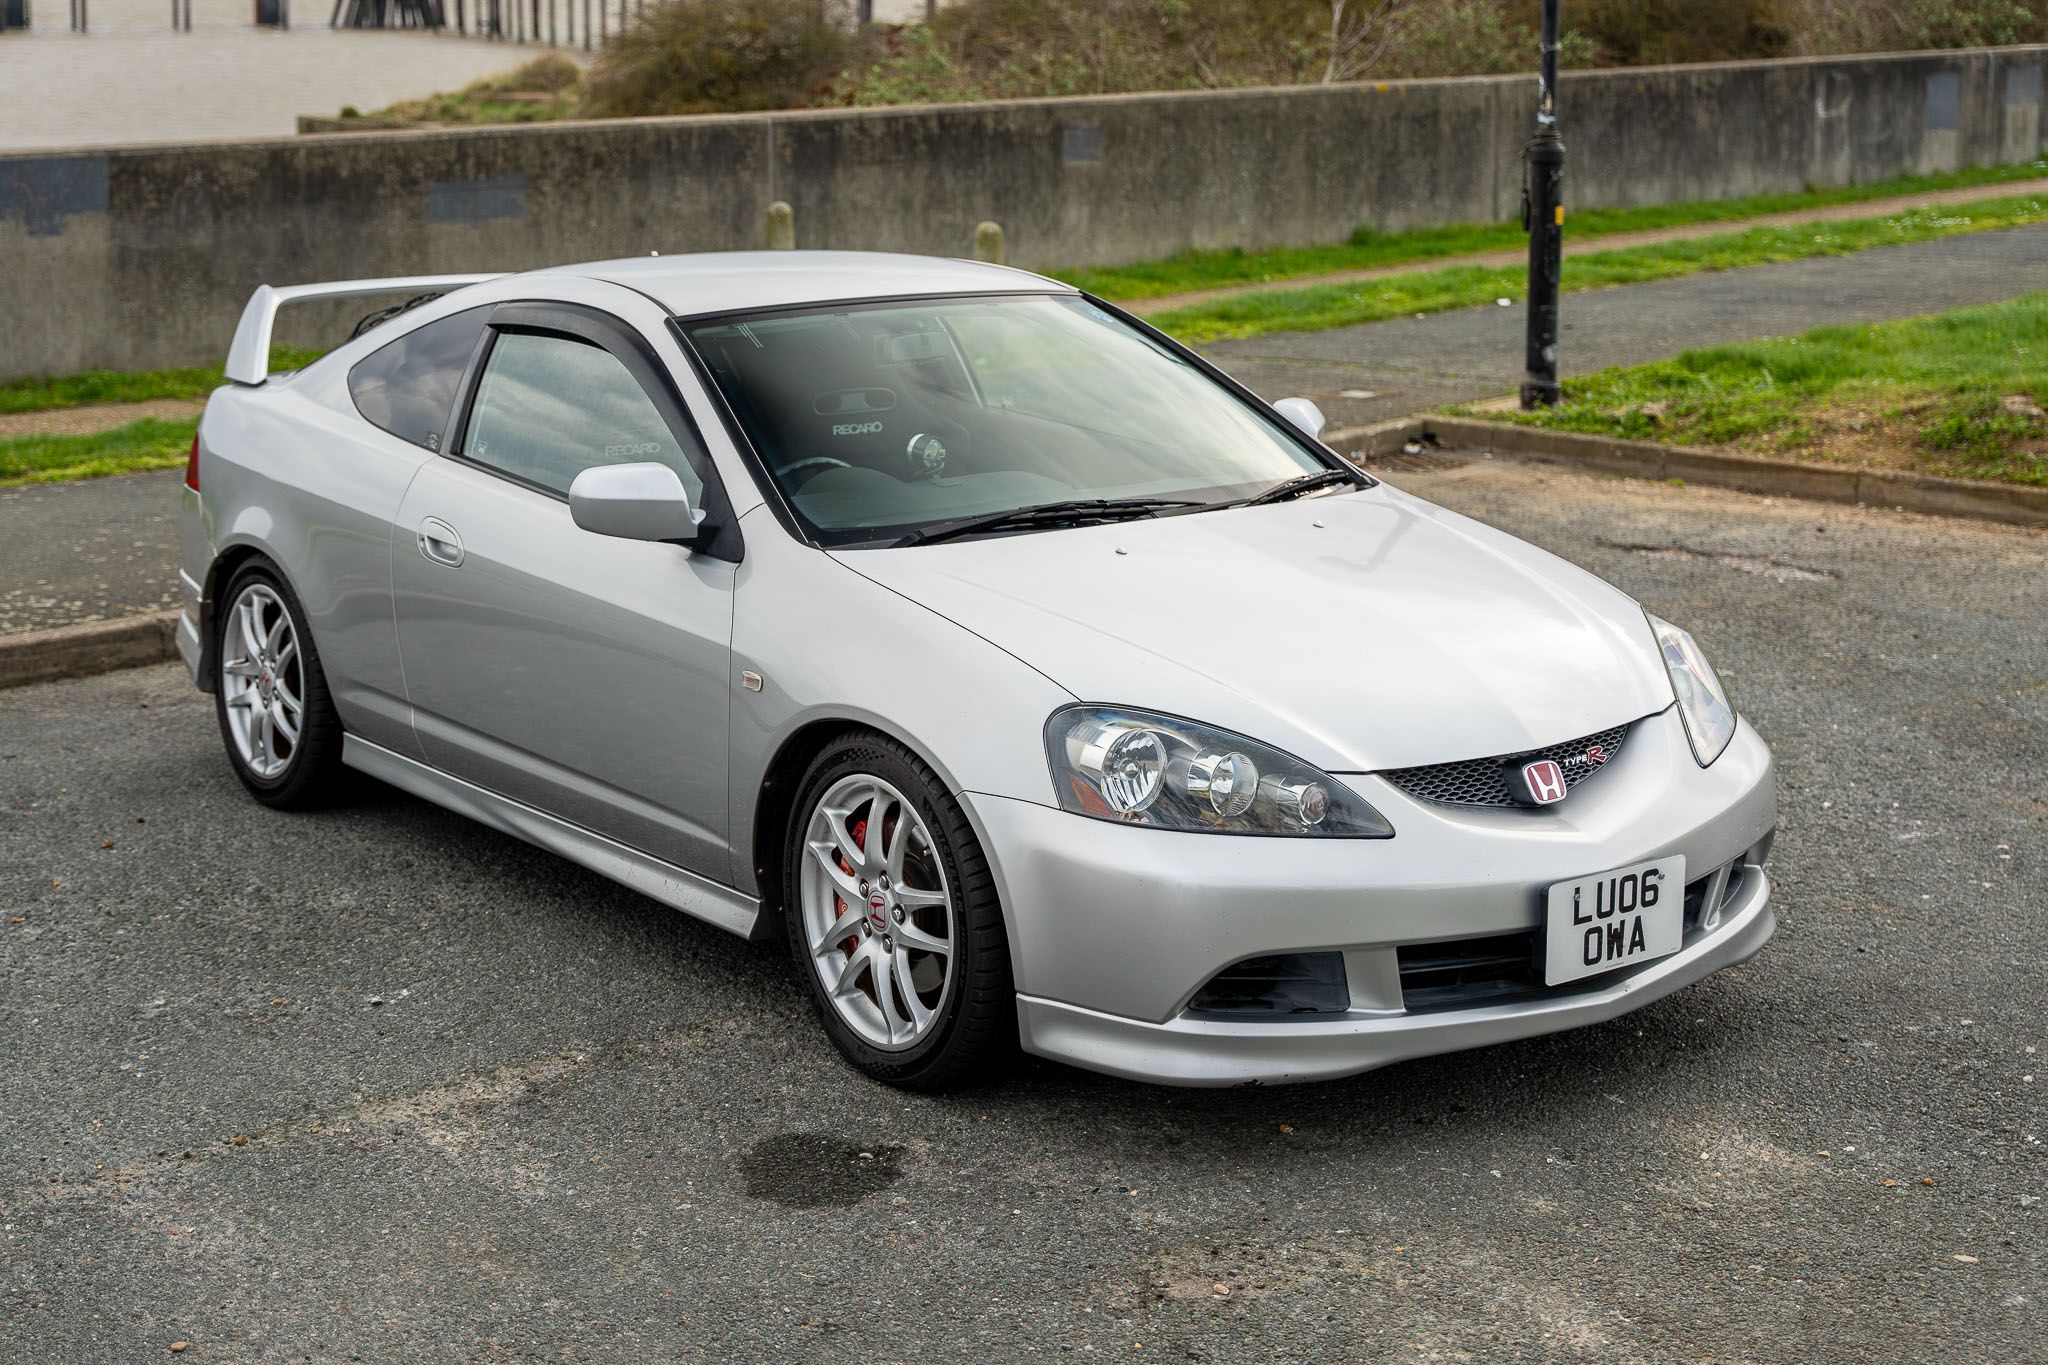 2006 Honda Integra Type R DC5 for sale by auction - PistonHeads UK